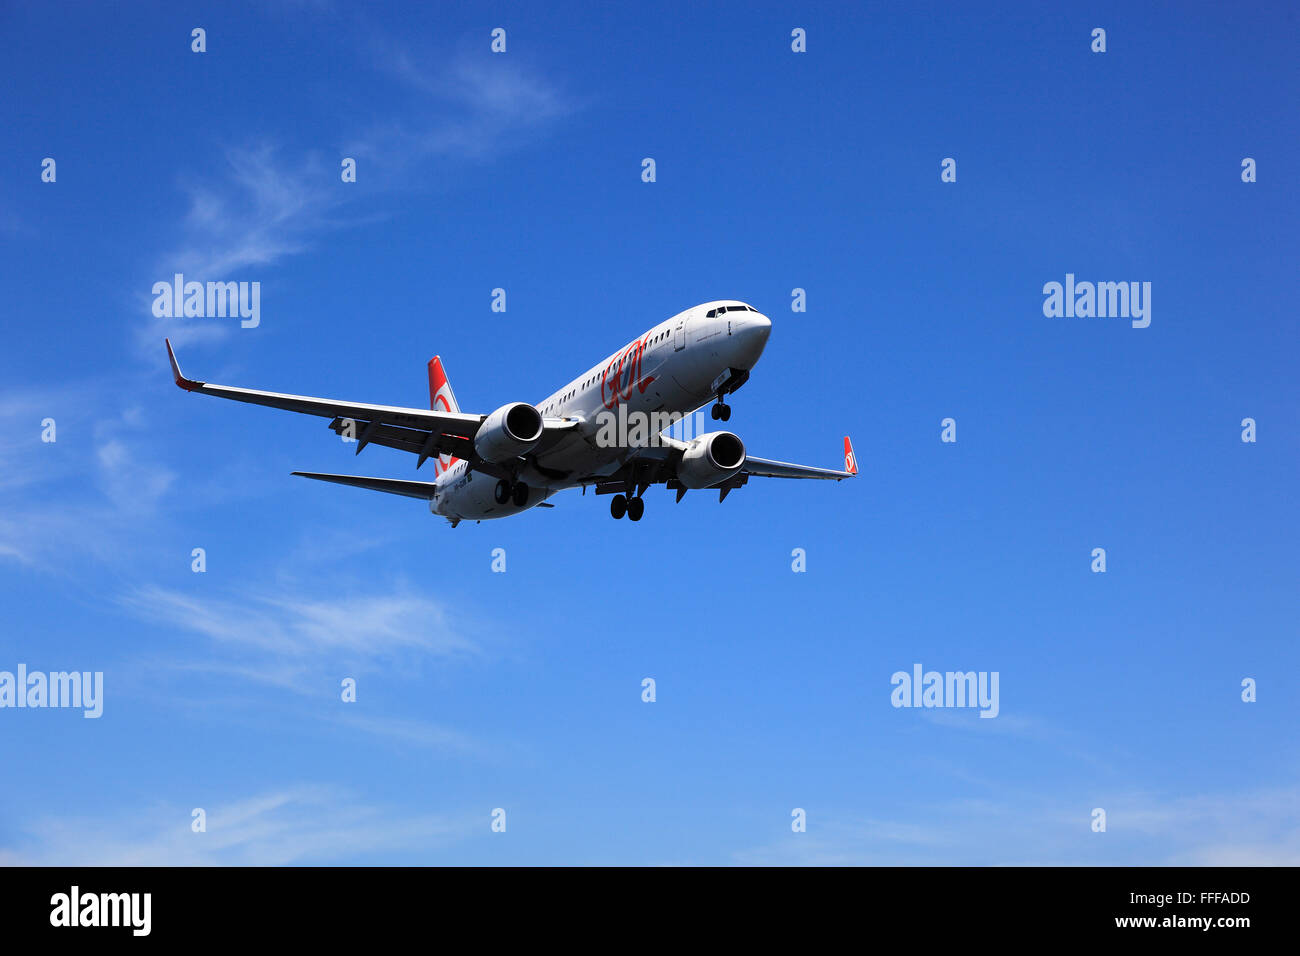 Aircraft of GOL, Gol Transportes Aereos Brazilian low cost airline to touch down at the airport Aeroporto Santos Dumont in Rio d Stock Photo